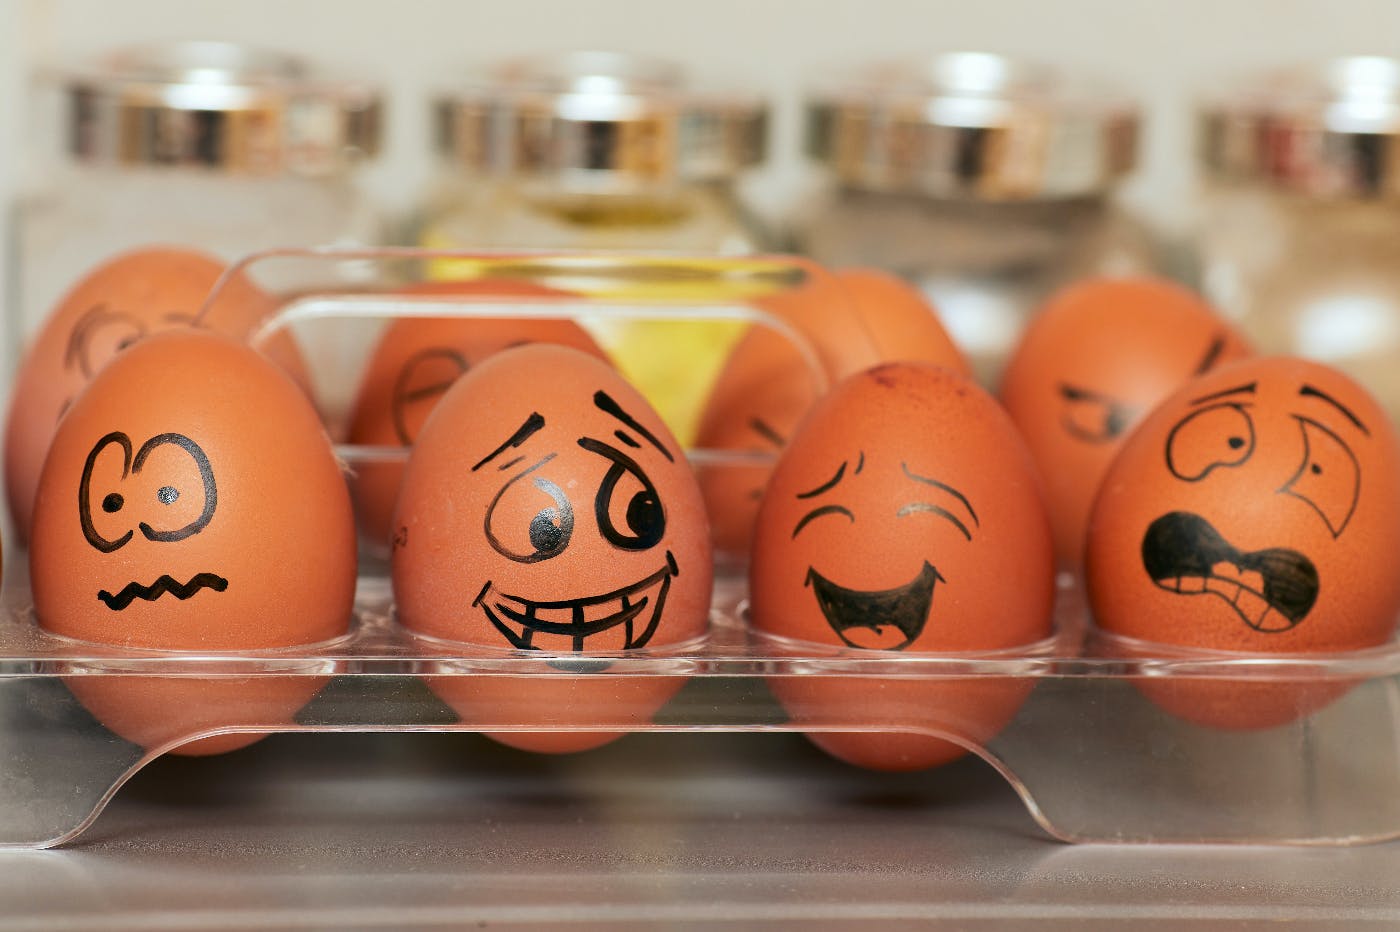 eggs in a tray with faces on them depicting emotional states